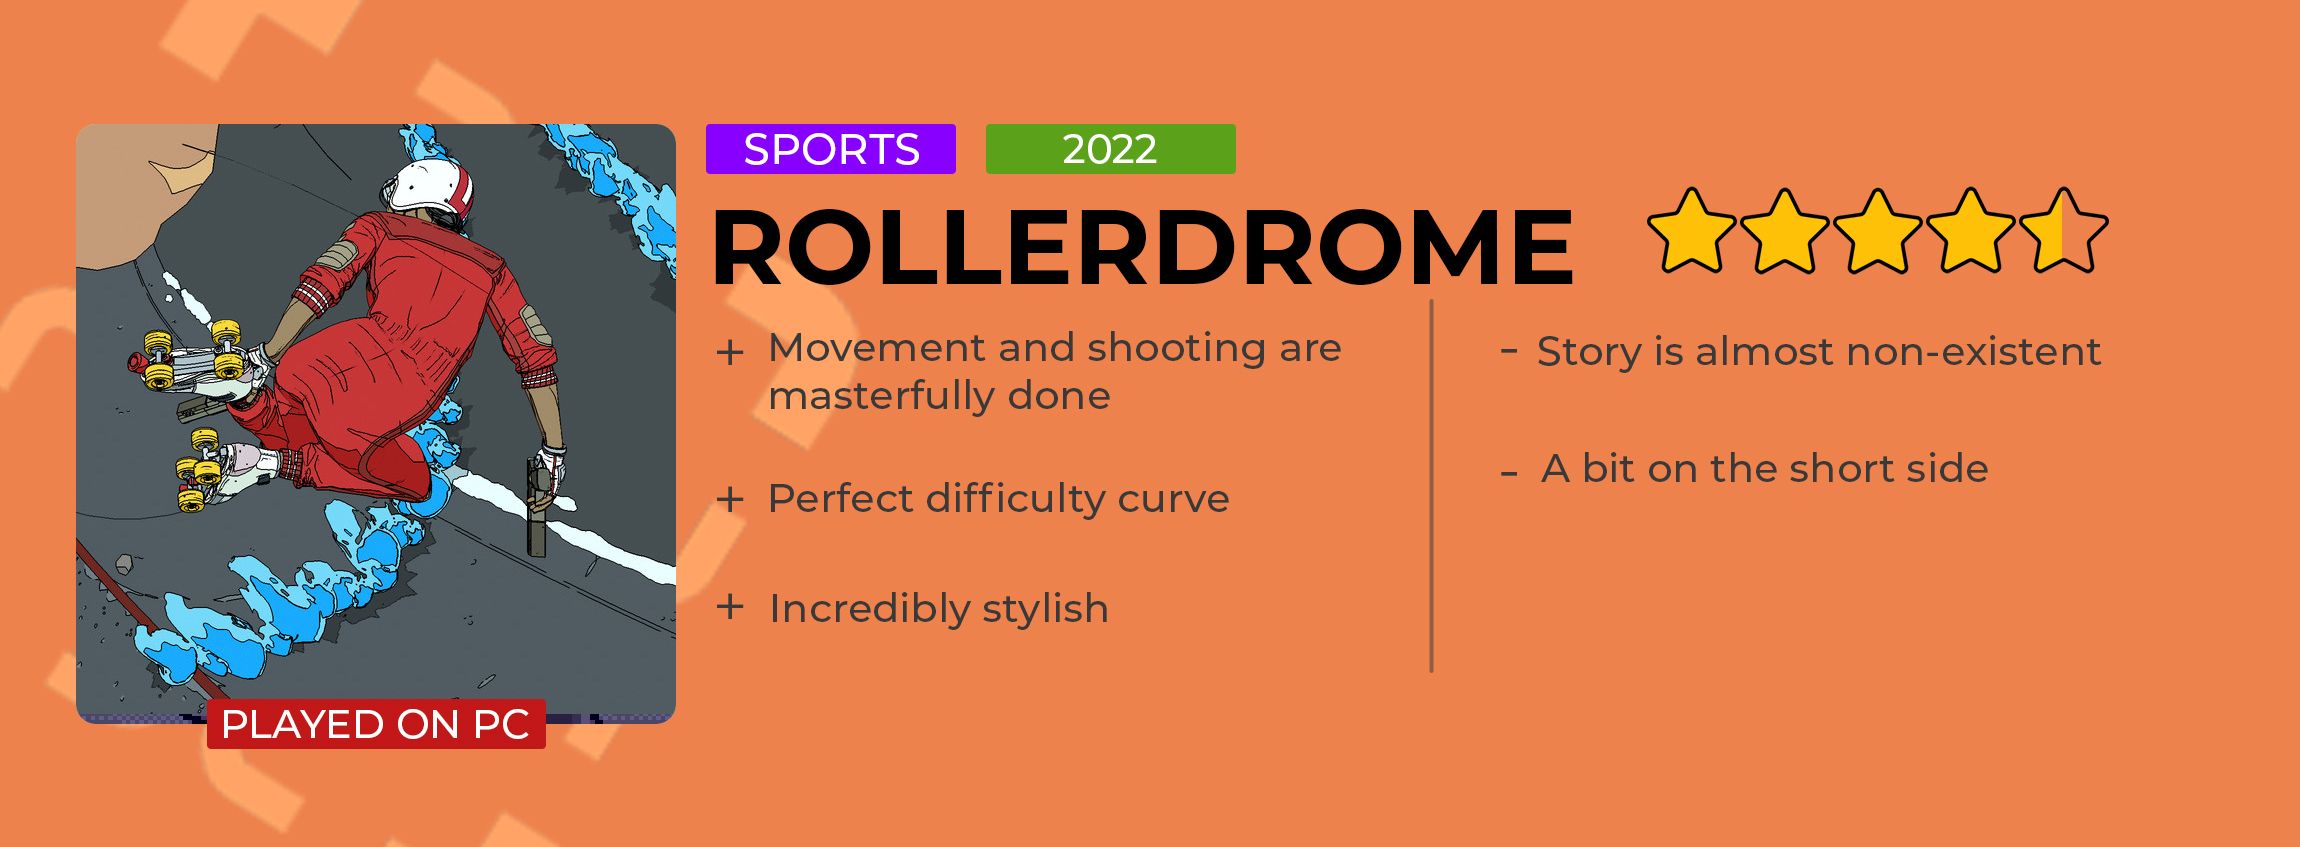 RollerDome Review Card